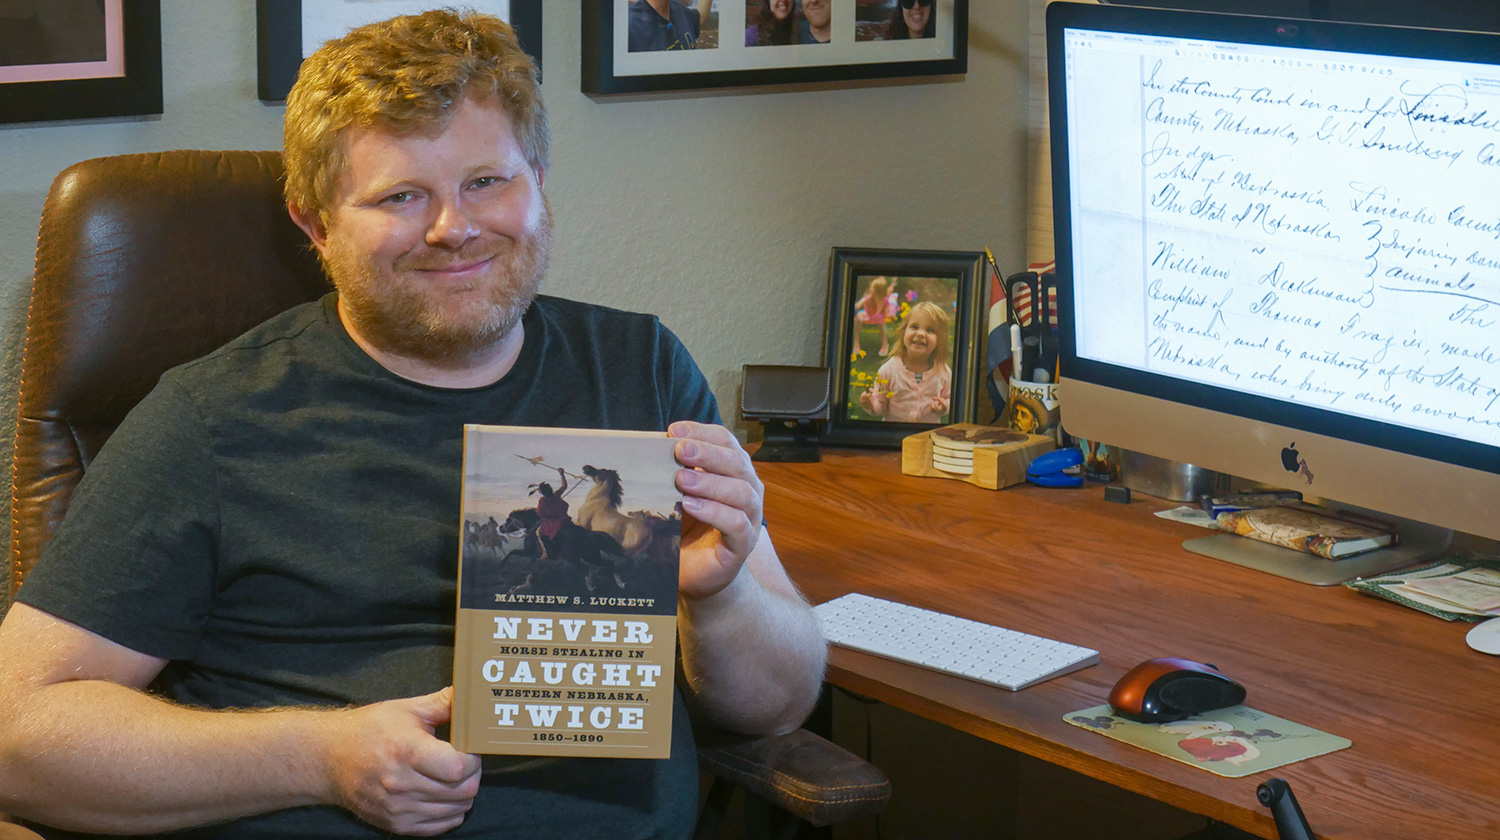 Mathew Luckett with his new book “Never Caught Twice: Horse Stealing in Western Nebraska, 1850-1890.”